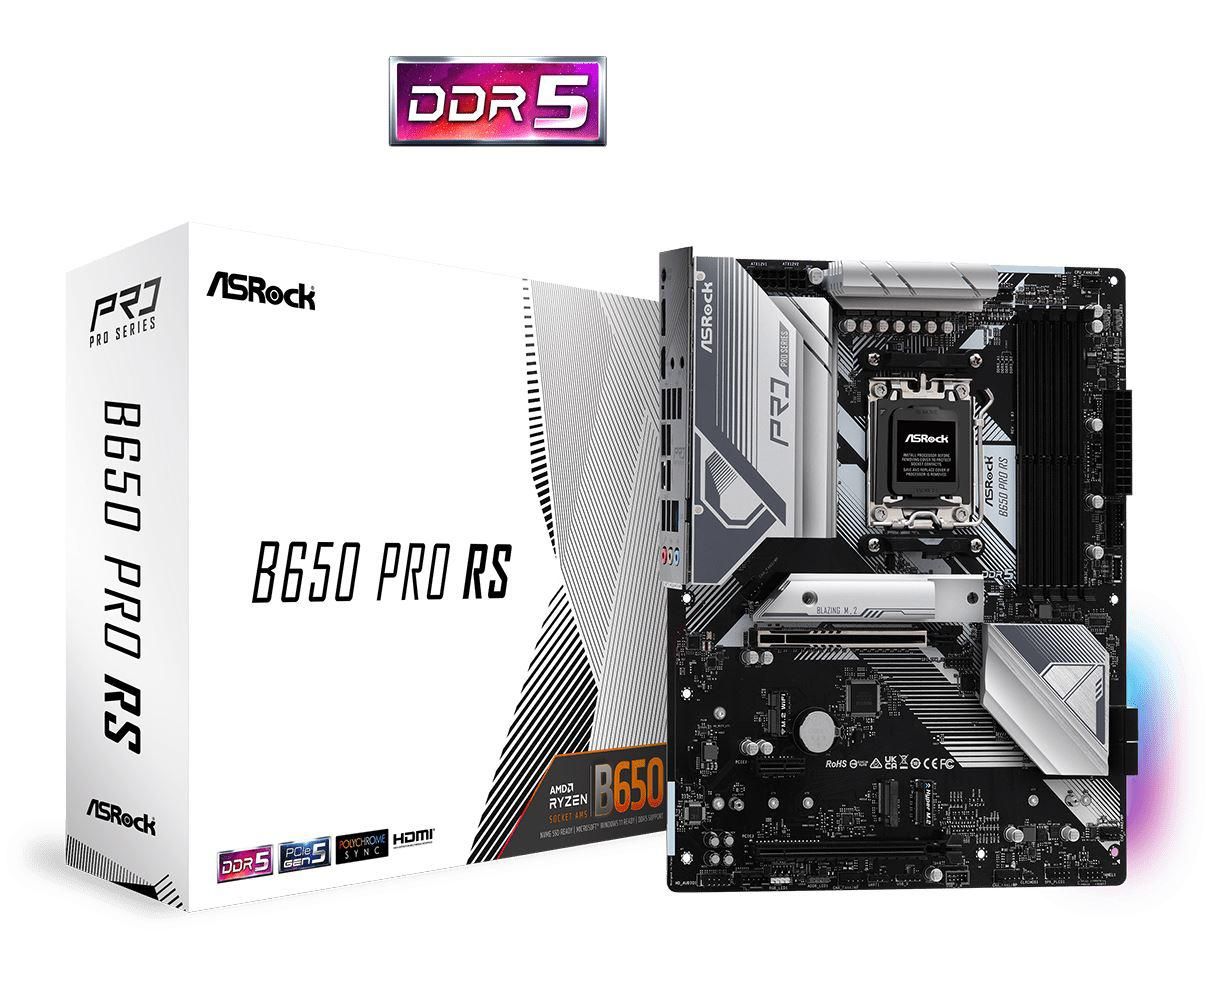 Placa de baza AsRock B650 PRO RS AM5  Supports AMD Ryzen™ 7000 Series Processors 14+2+1 Phase Power Design, SPS 4 x DDR5 DIMMs, supports up to 6200+(OC) 1 PCIe 4.0 x16, 1 PCIe 3.0 x16, 1 PCIe 4.0 x1, 1 M.2 Key-E for WiFi Graphics Output Options: 1 HDMI, 1 DisplayPort 7.1 CH HD Audio (Realtek ALC897_2